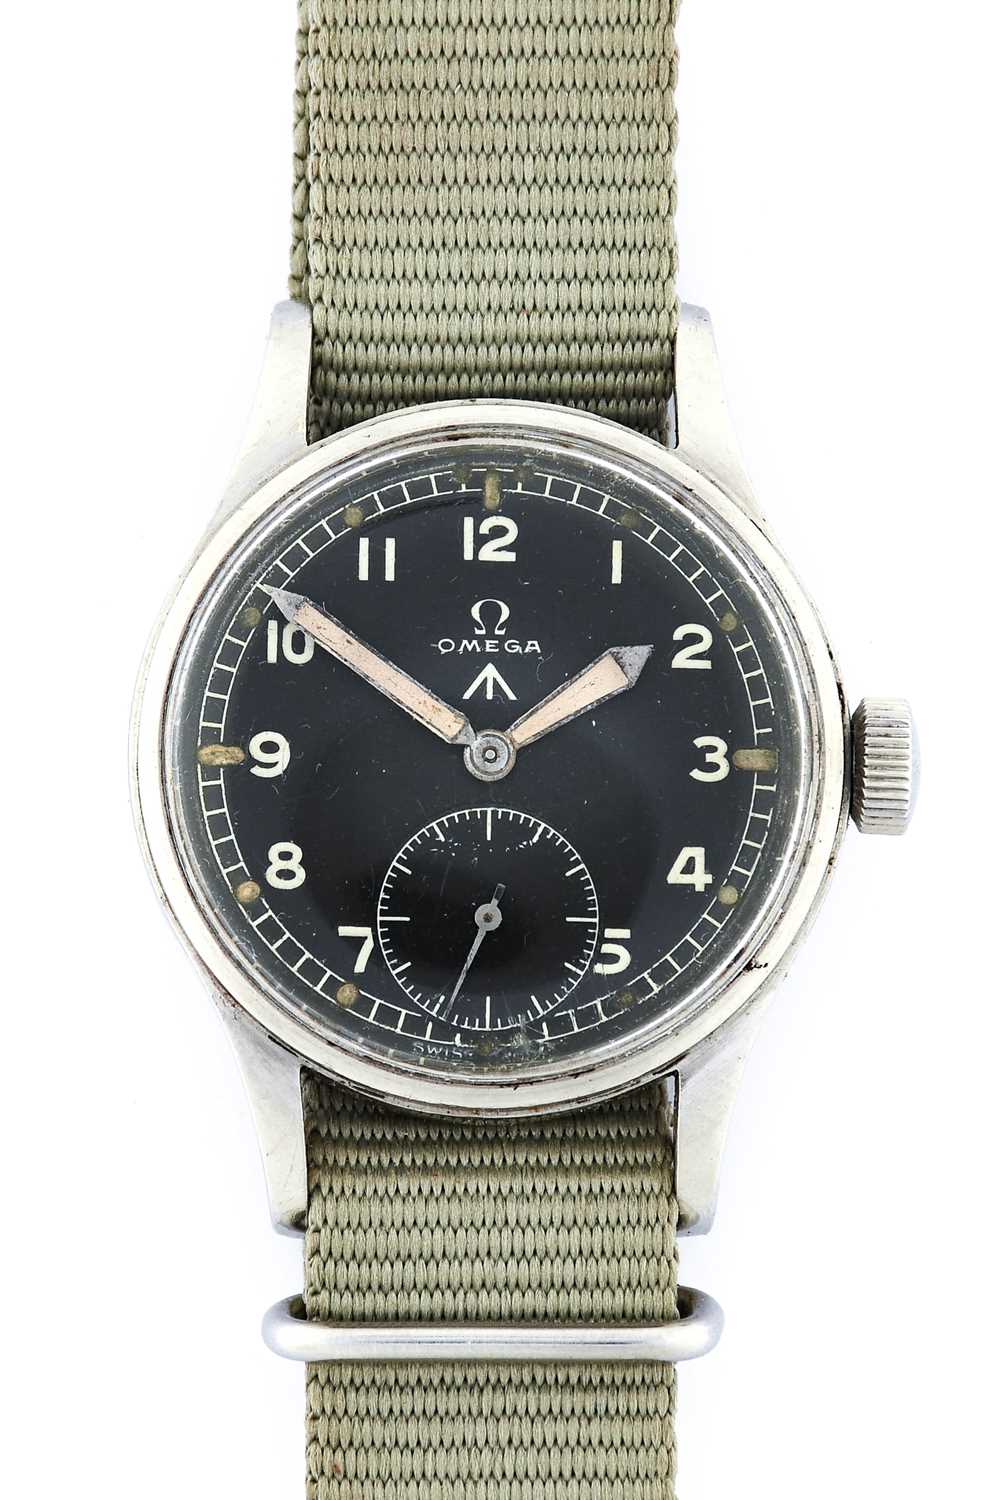 Omega: A World War II Military Wristwatch, signed Omega, Known by Collectors as one of "The Dirty